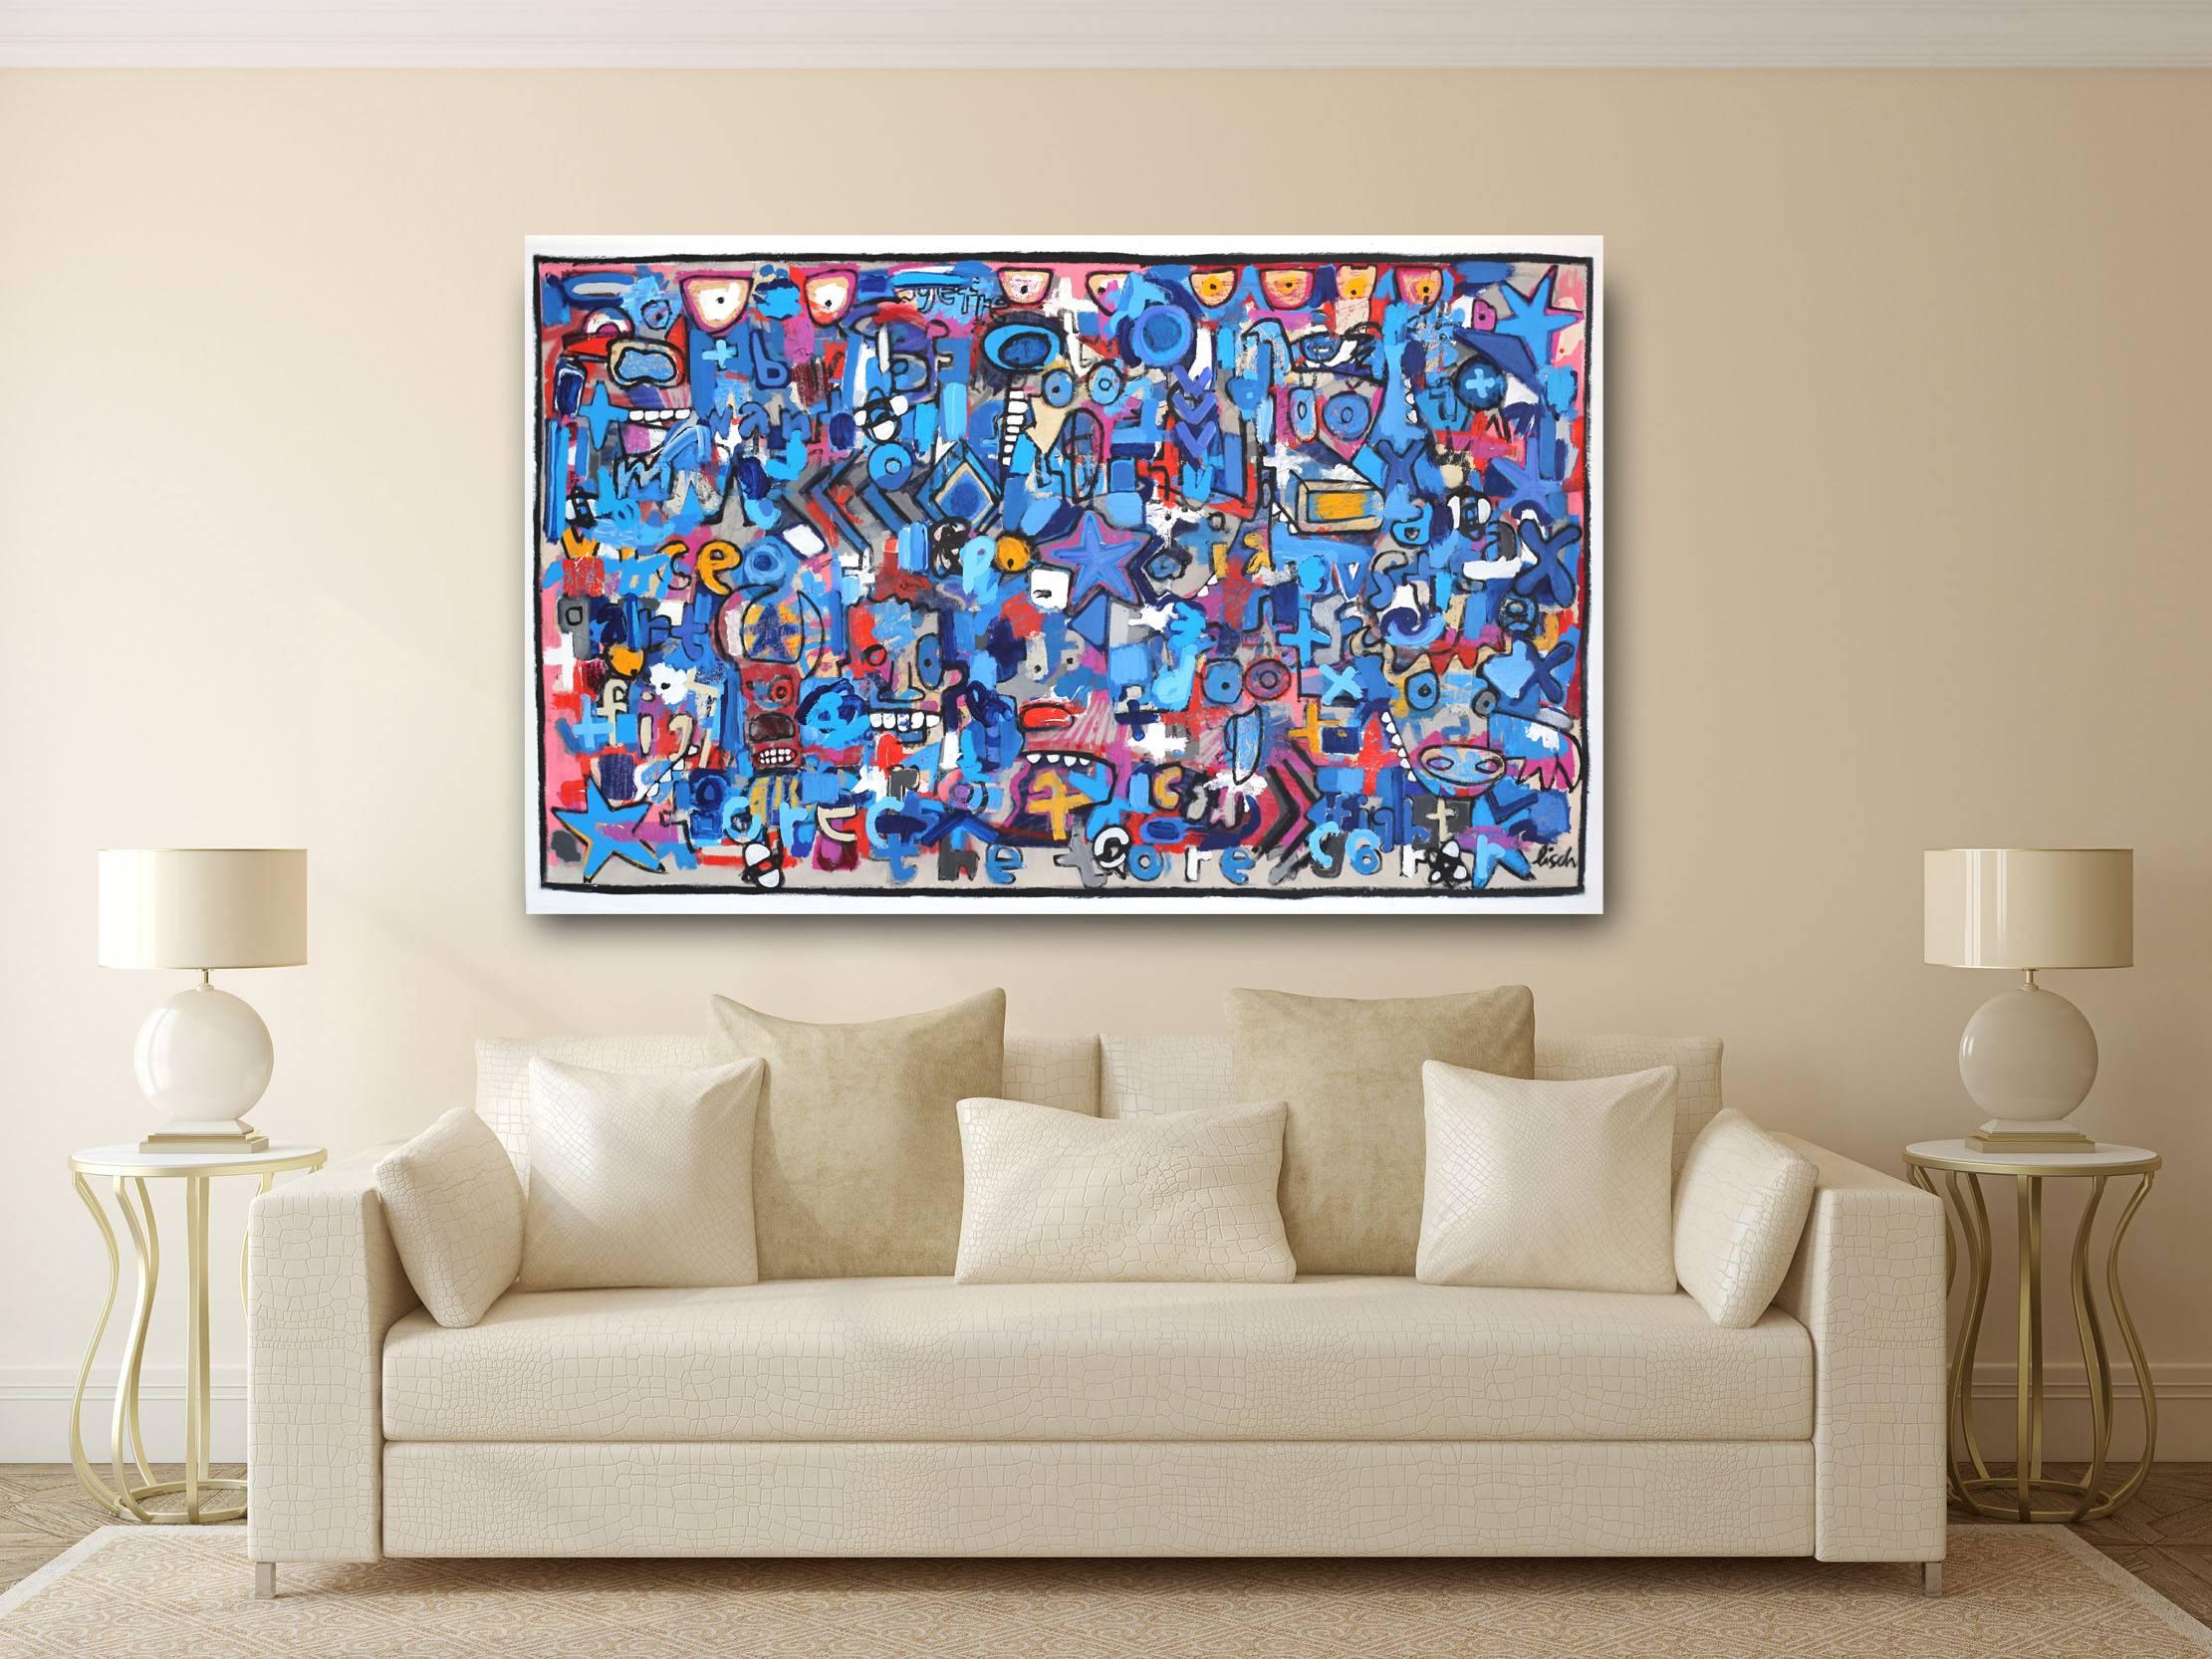 The Bullfighter - Blue Abstract Painting by Jonas Fisch